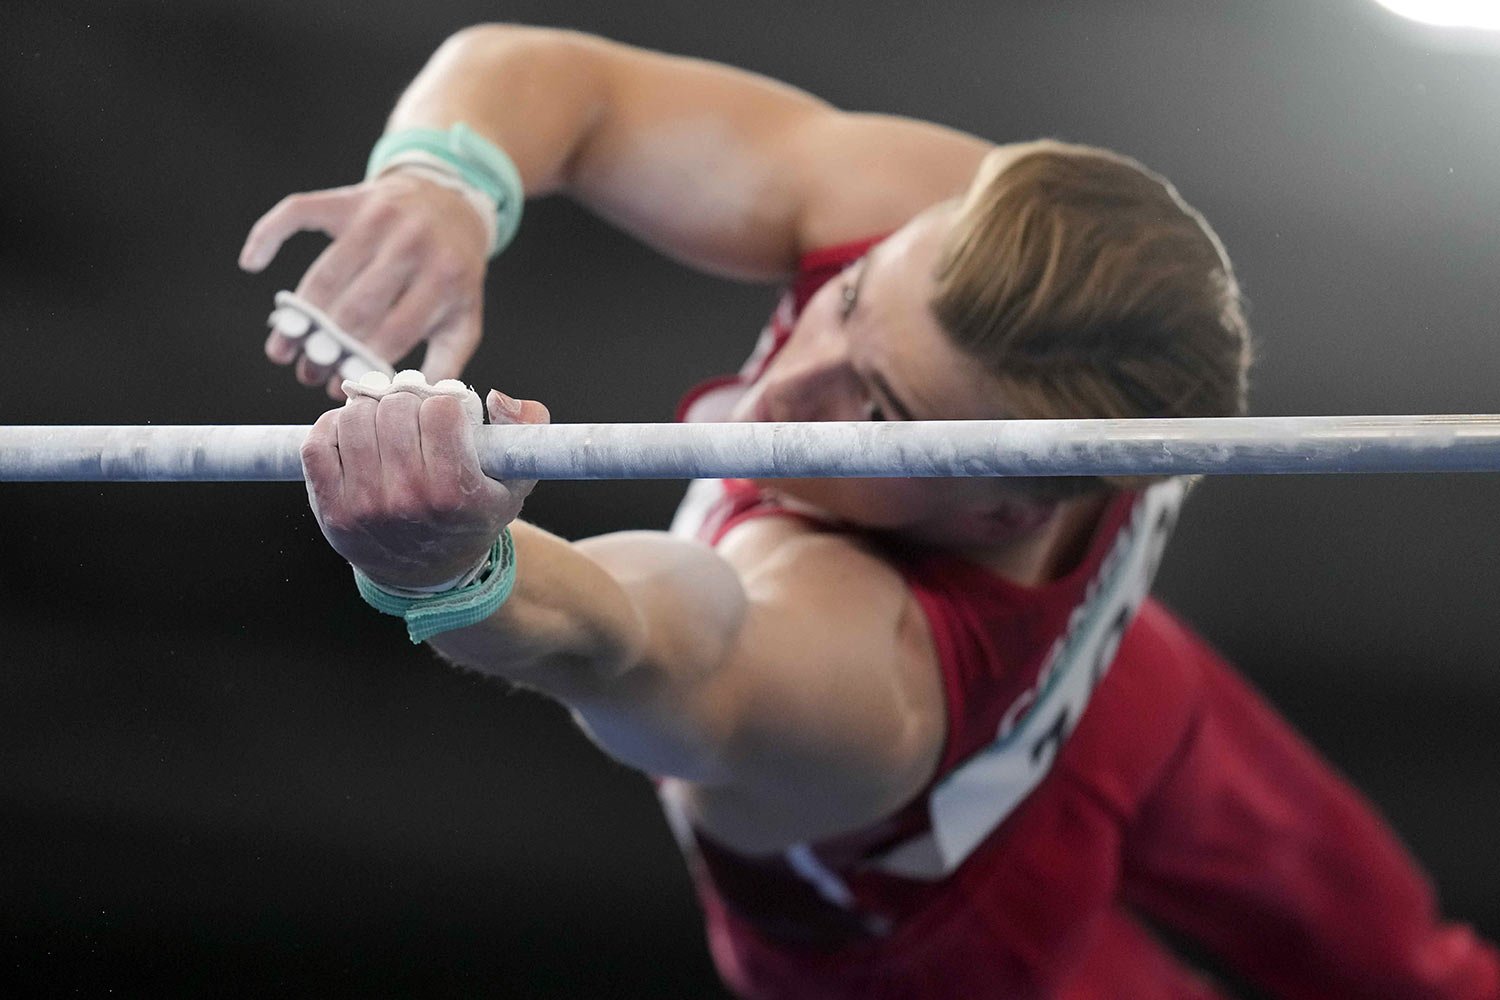  Canada's Felix Dolci competes on the uneven bars during the men’s artistic gymnastics all-around final at the Pan American Games in Santiago, Chile, Oct. 23, 2023. Dolci took the gold. (AP Photo/Martin Mejia) 